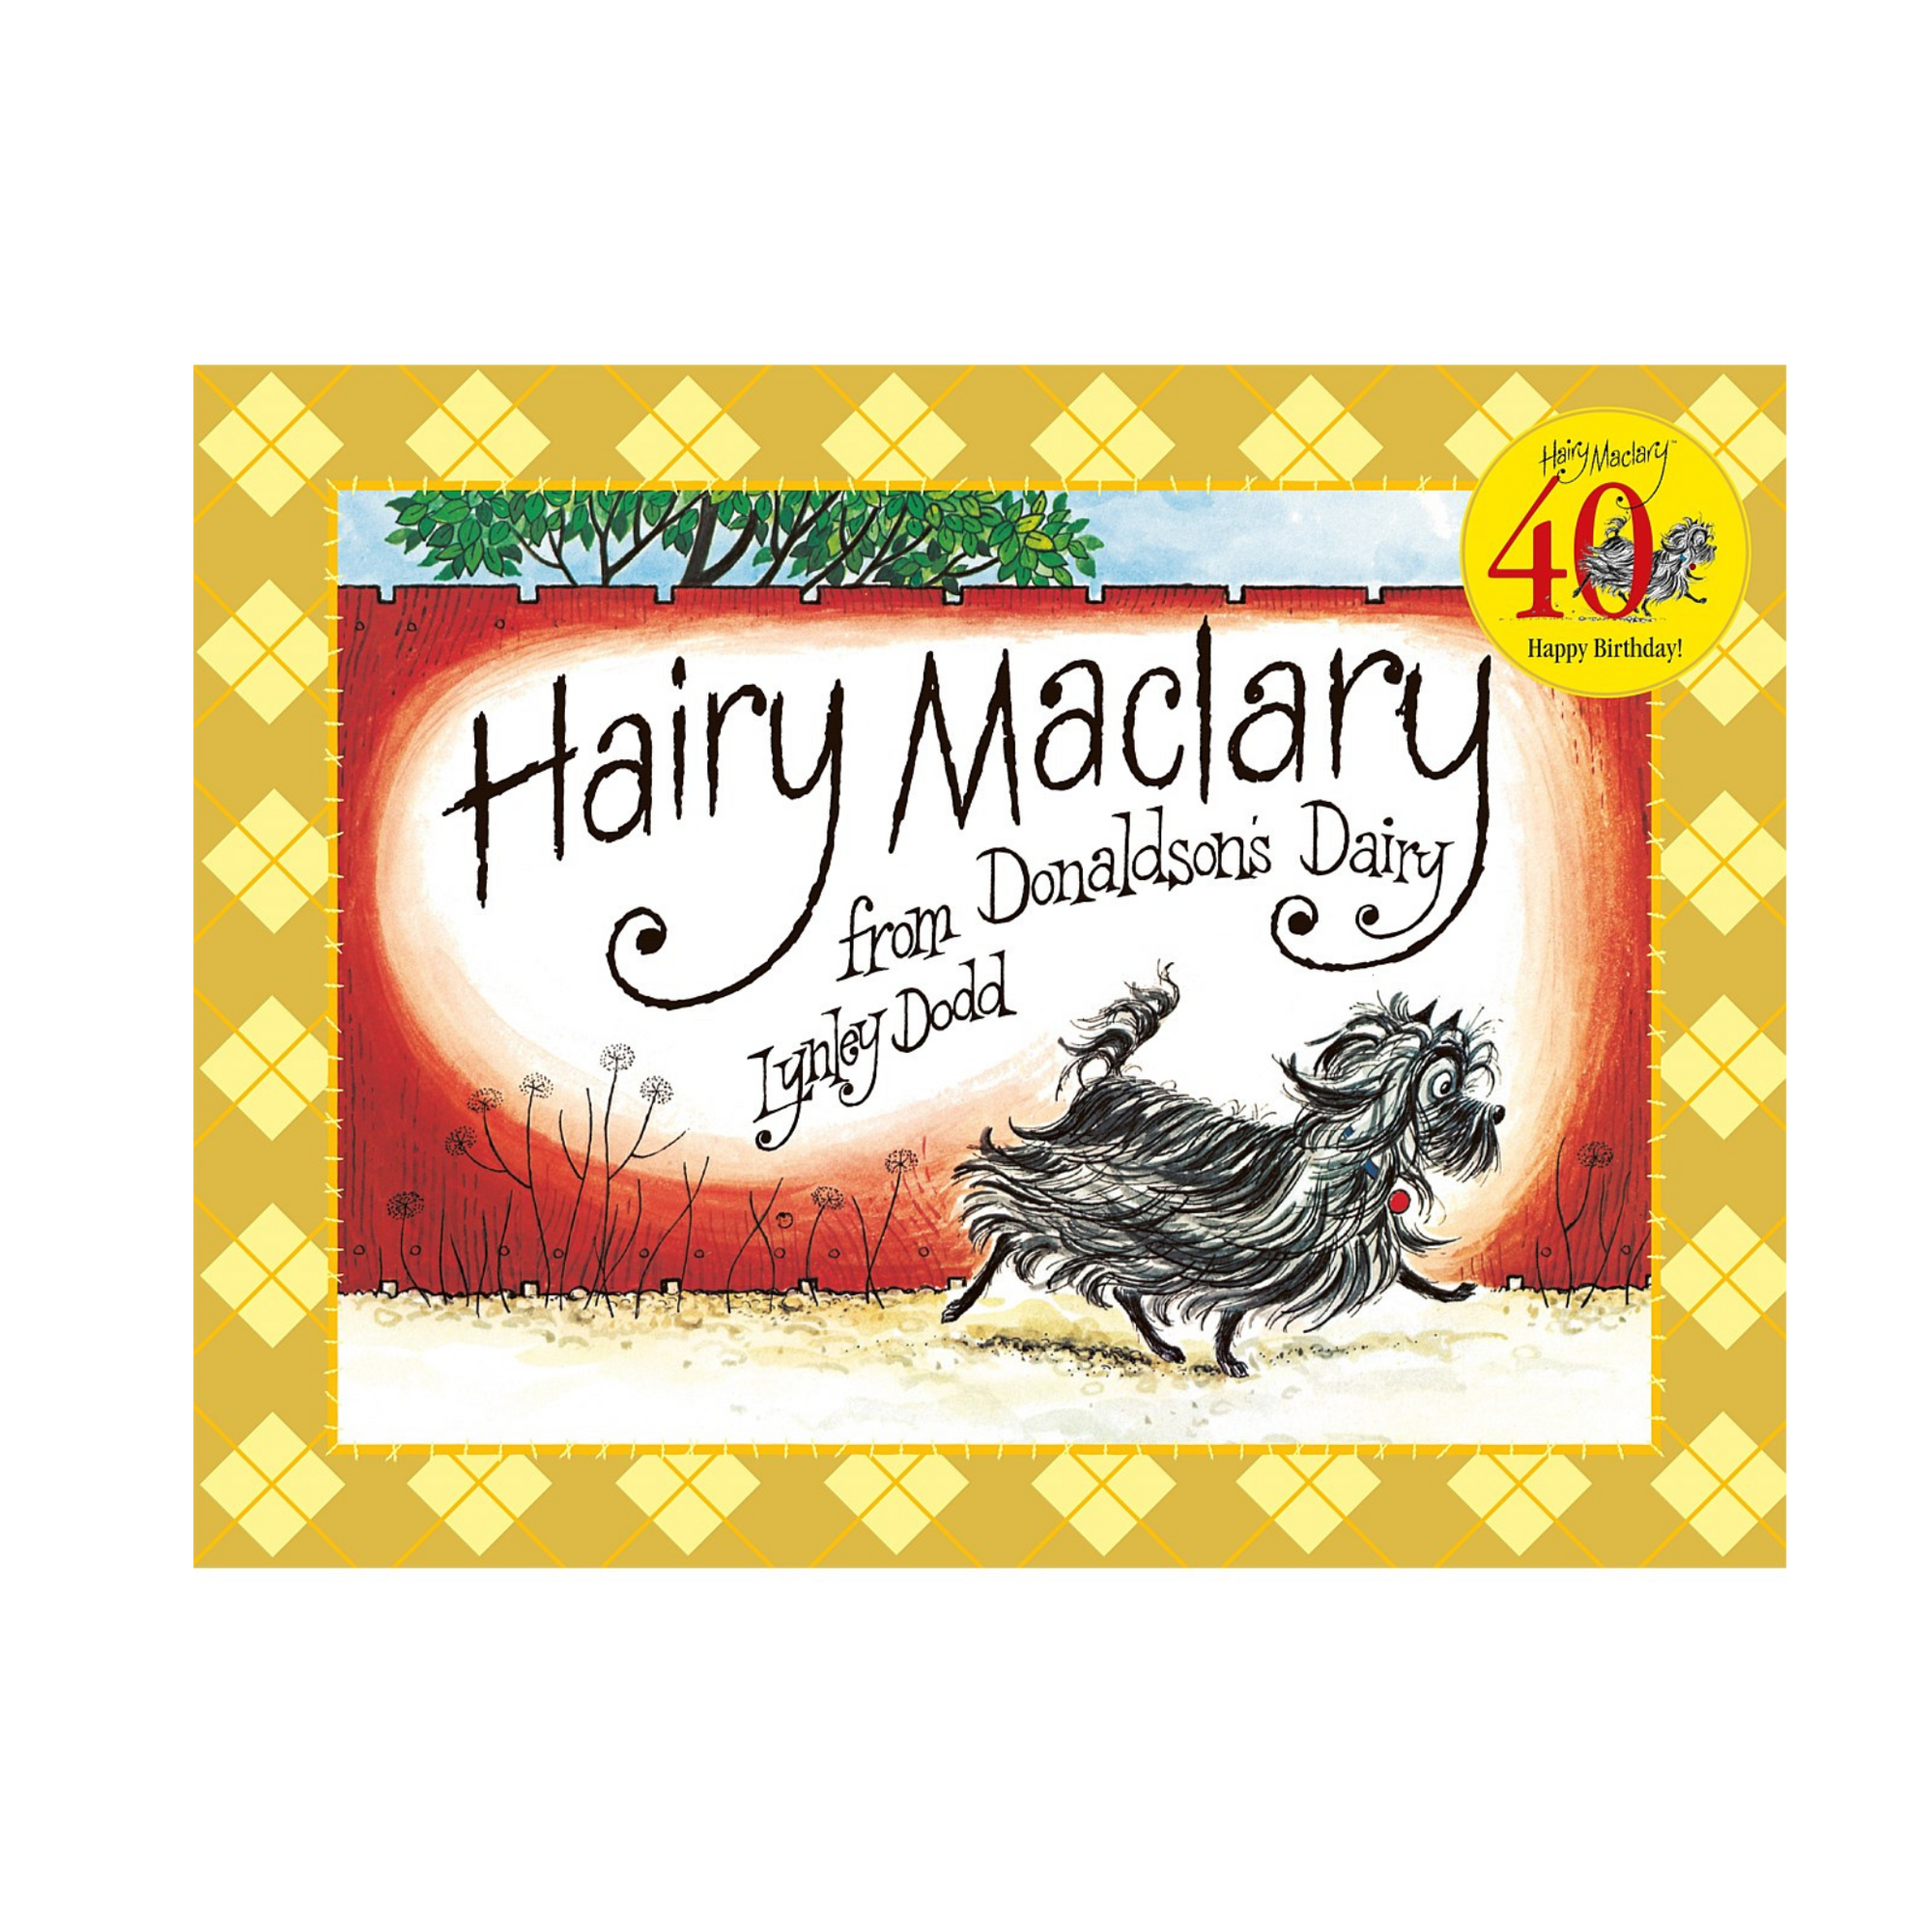 Hairy Maclary from Donaldson's Dairy by Lynley Dodd 40th Anniversary Edition